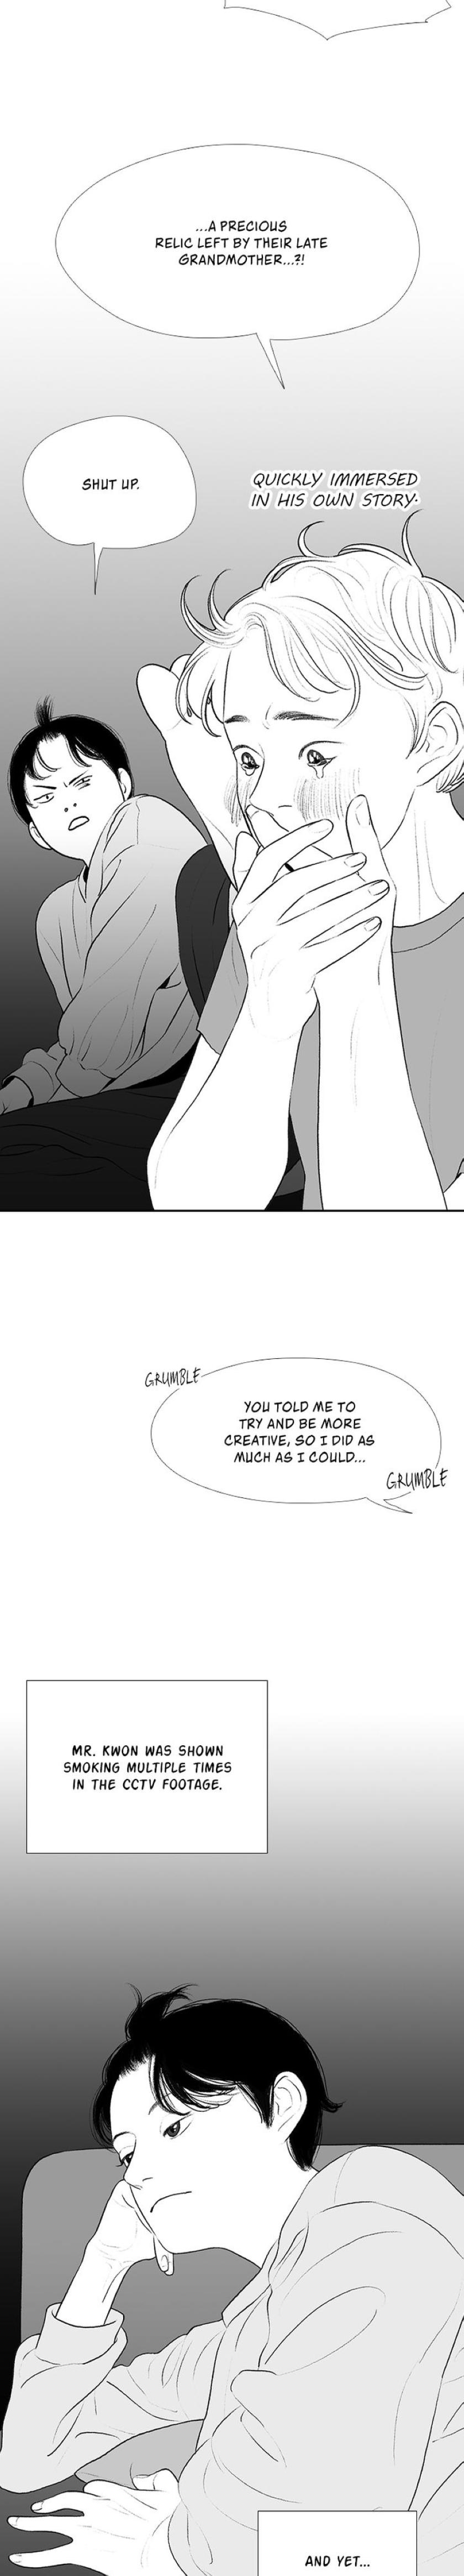 Kill Me Now - Page 4